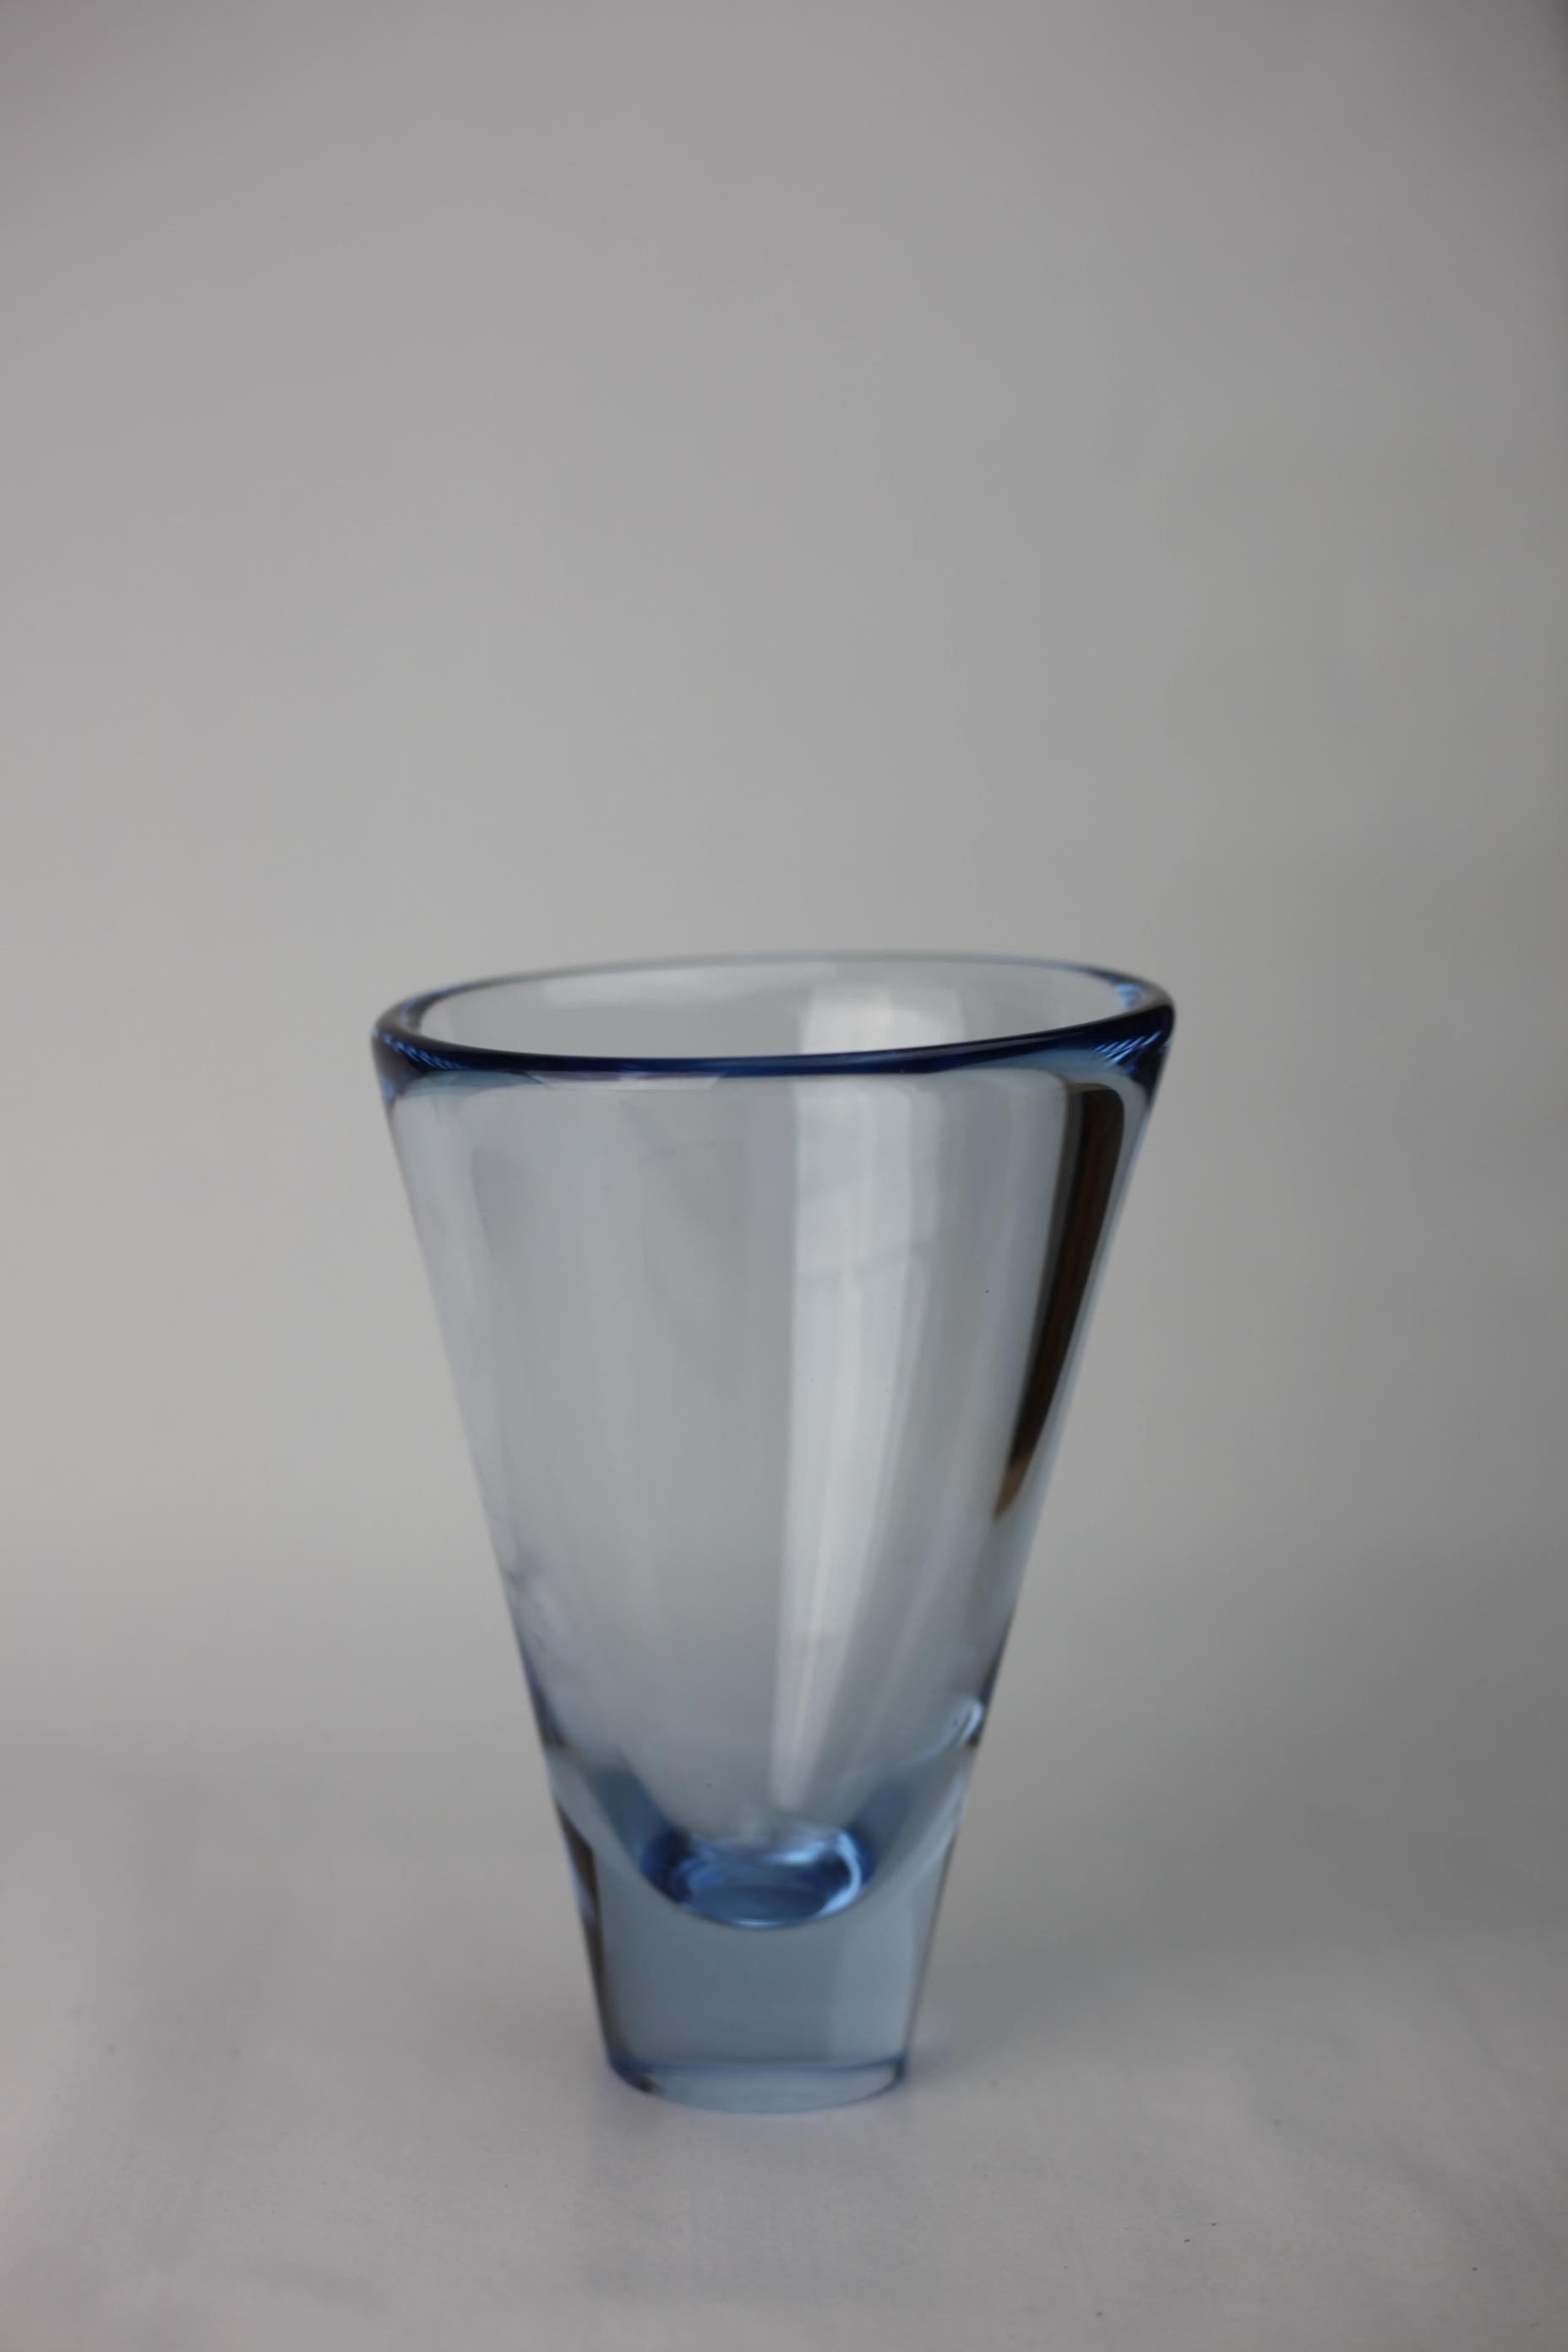 The Aqua blue ''Thule'' vase was made by Per Lütken for Holmegaard Glass in the 1950s 

No chips or flaws.